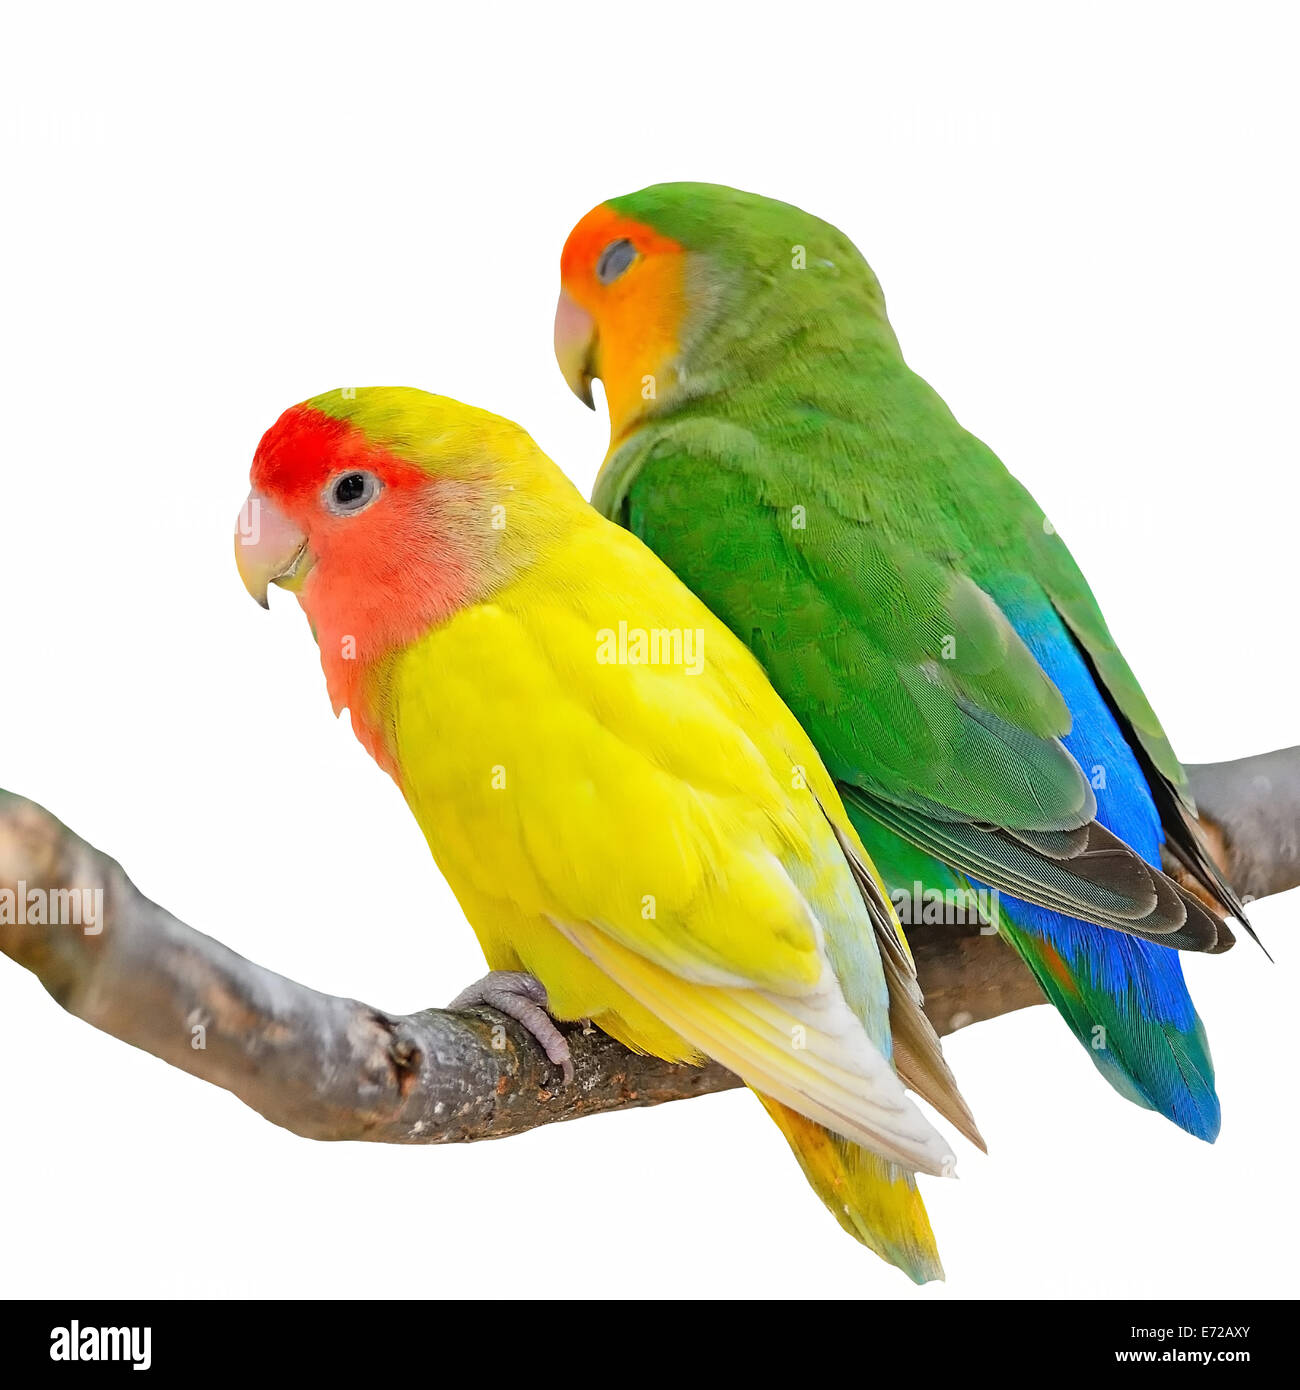 Beautiful bird, Lovebird, standing on the log, back profile, isolated on a white background Stock Photo